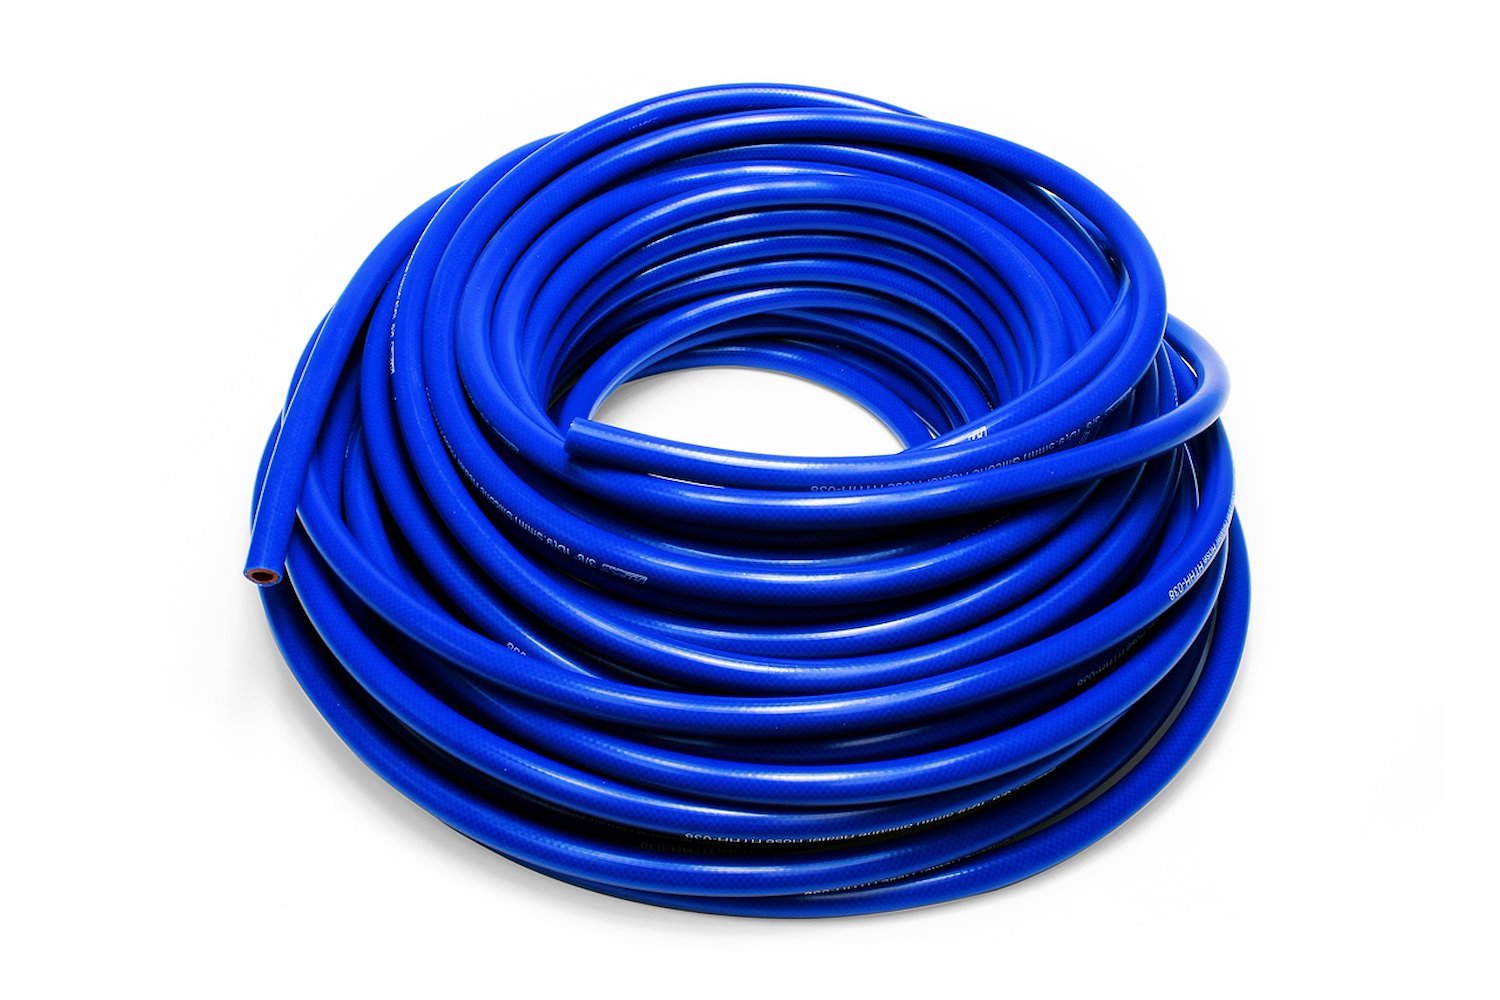 HTHH-013-BLUEx50 Silicone Heater Hose Tubing, High-Temp Reinforced, 1/8 in. ID, 50 ft. Roll, Blue